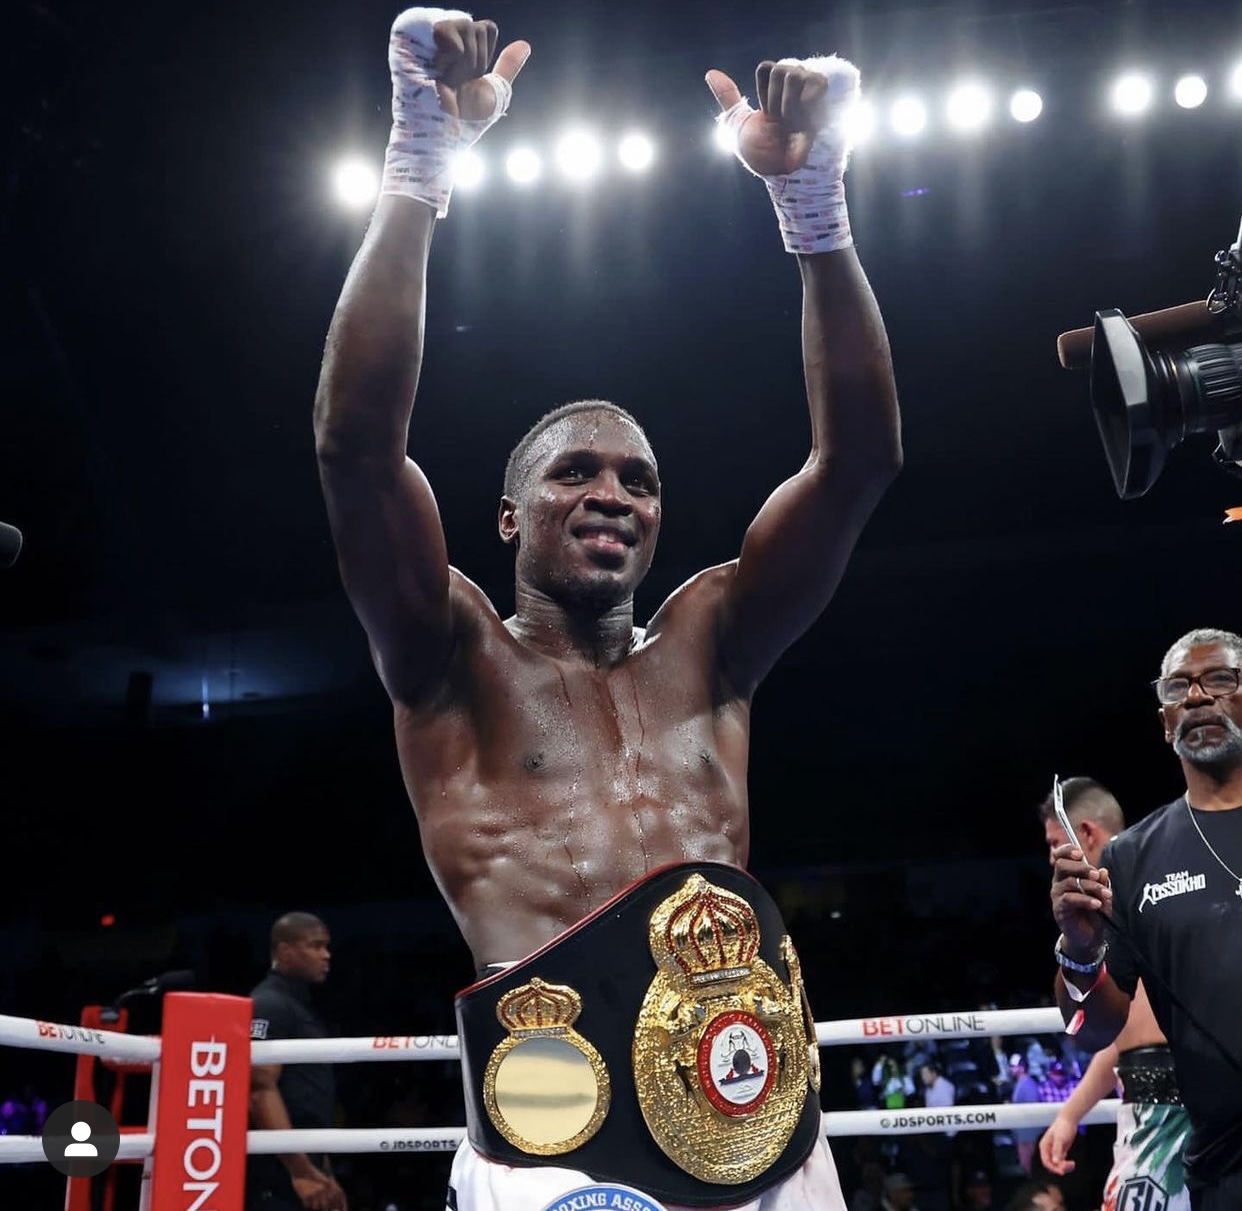 Cissokho retained his WBA regional title after a great performance 